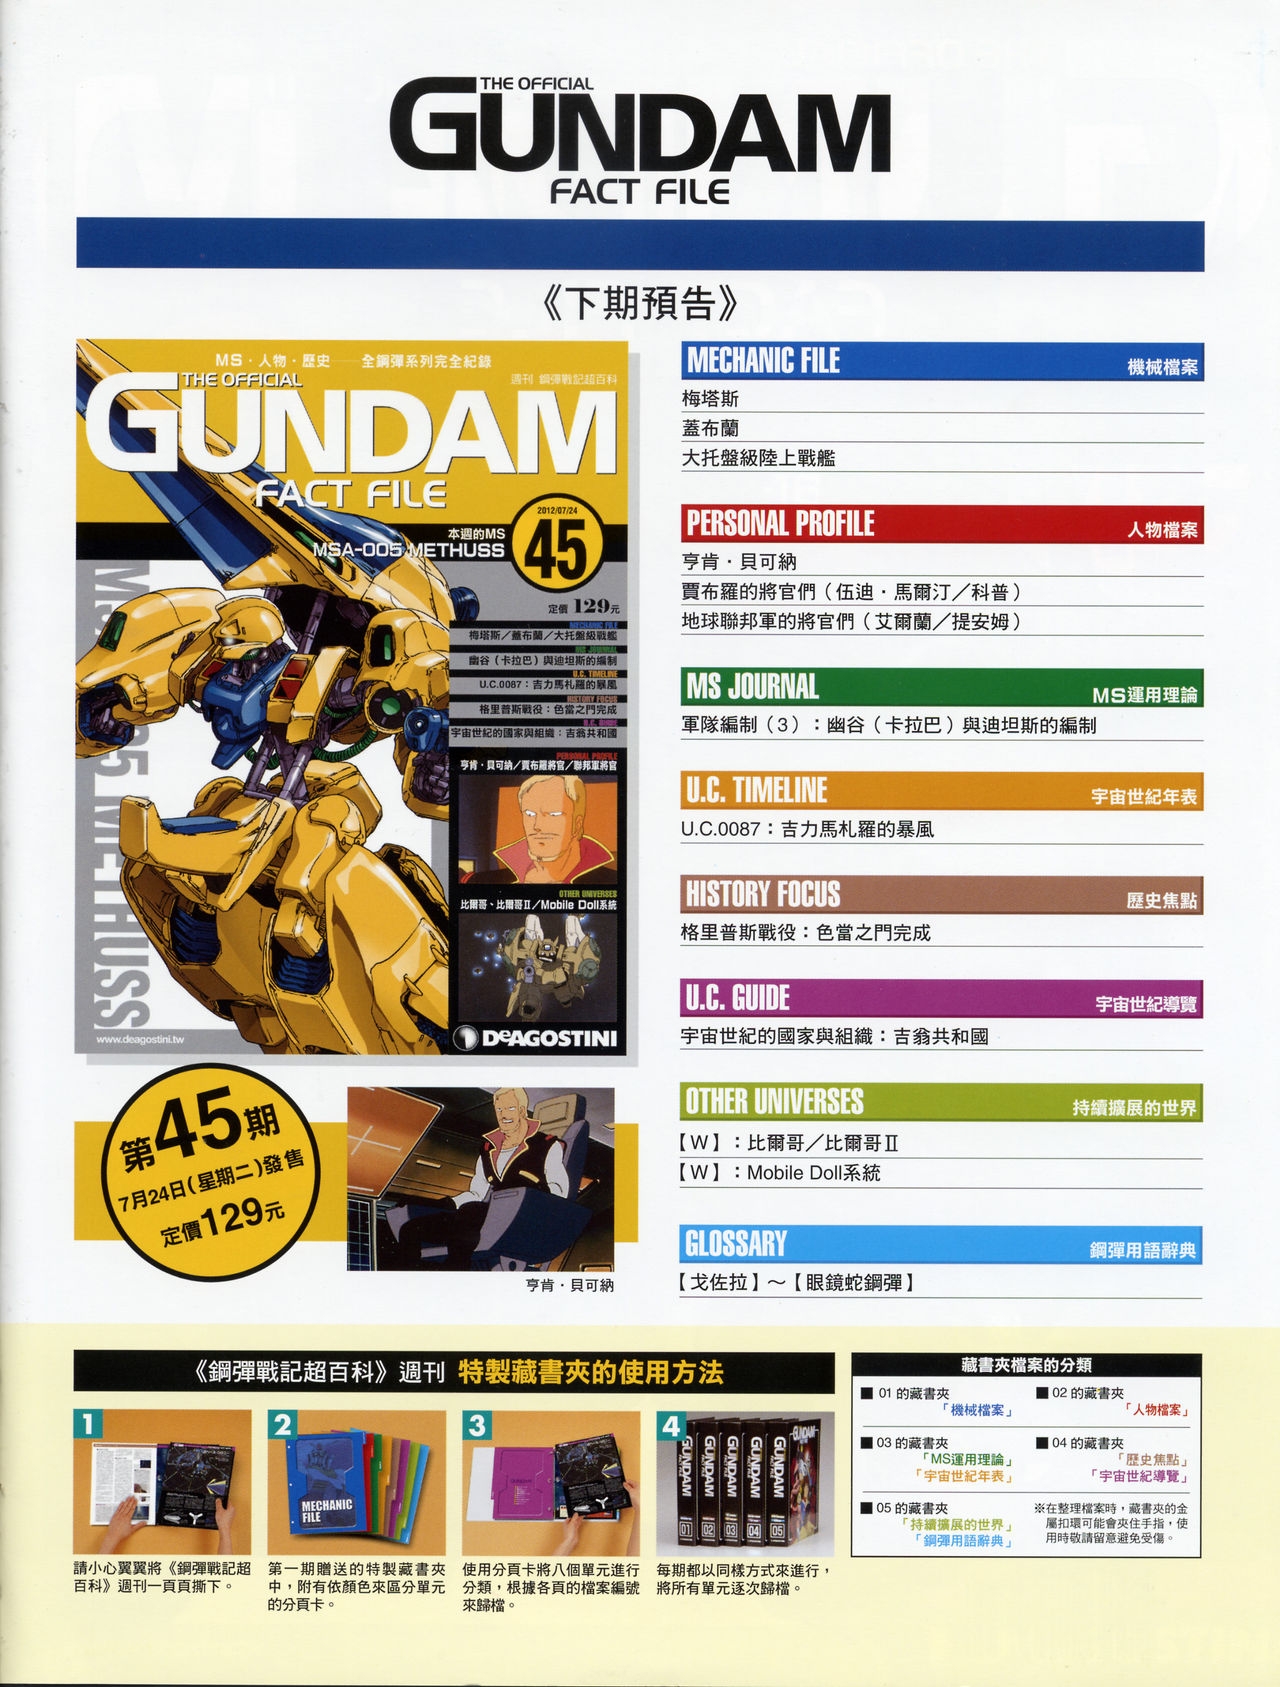 The Official Gundam Fact File - 044 [Chinese] 2